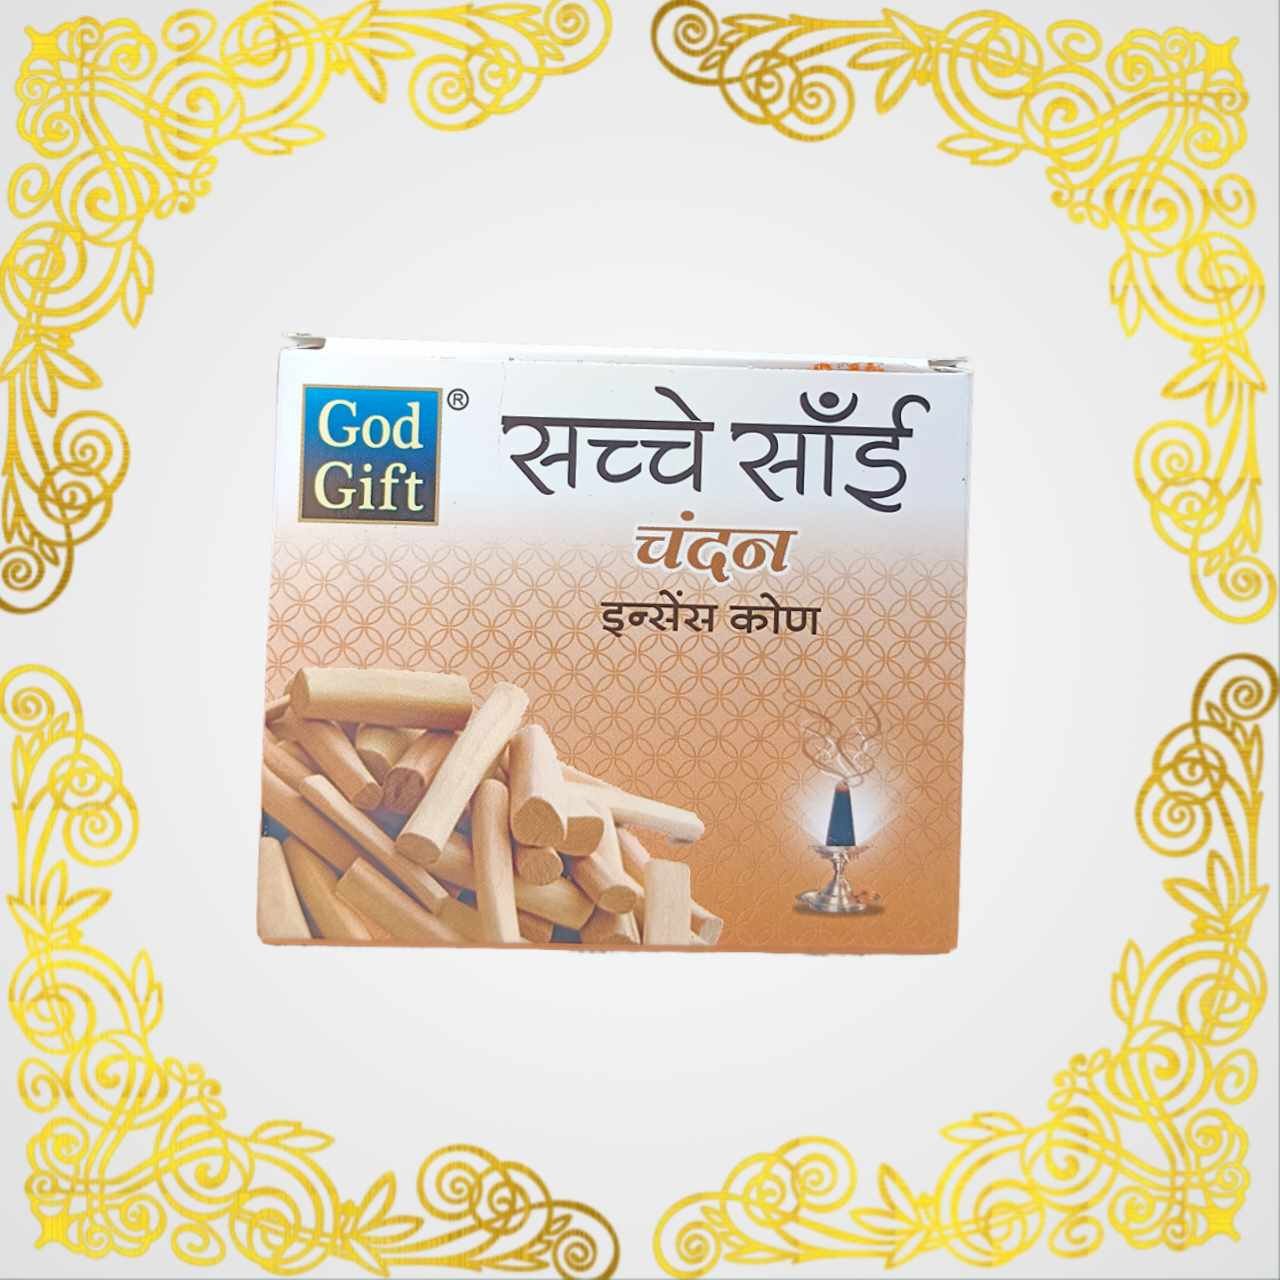 God Gift Dhoop cones - Pujagoodies.com